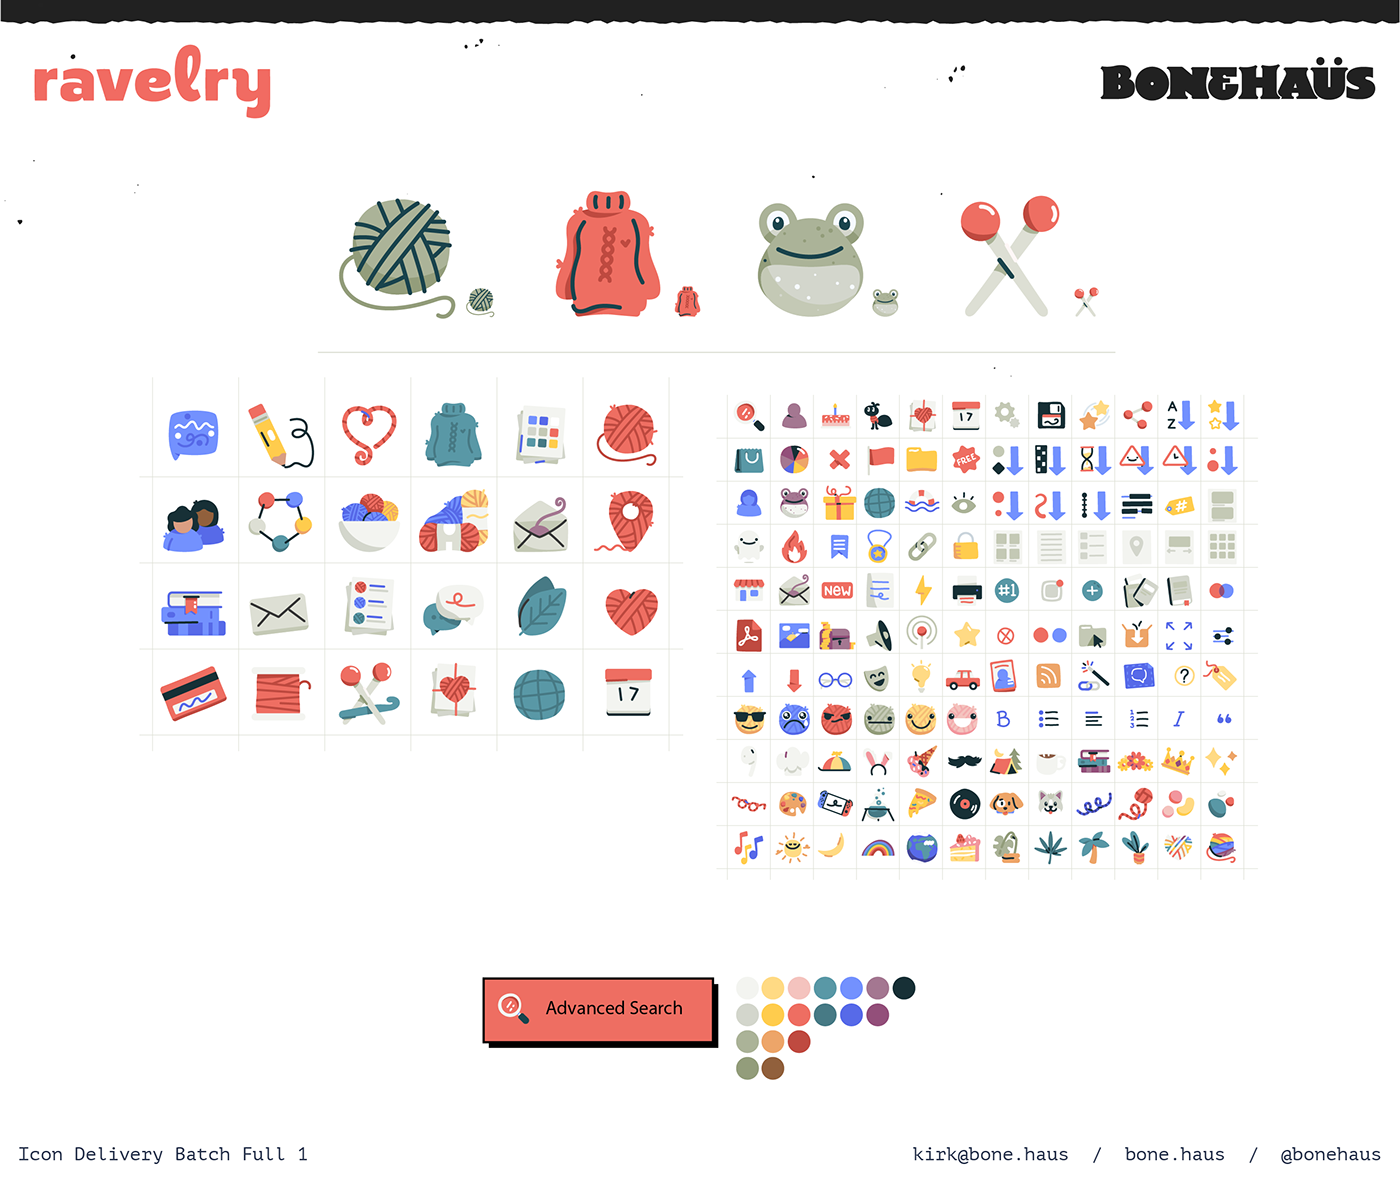 Emojis of various knitting related icons.